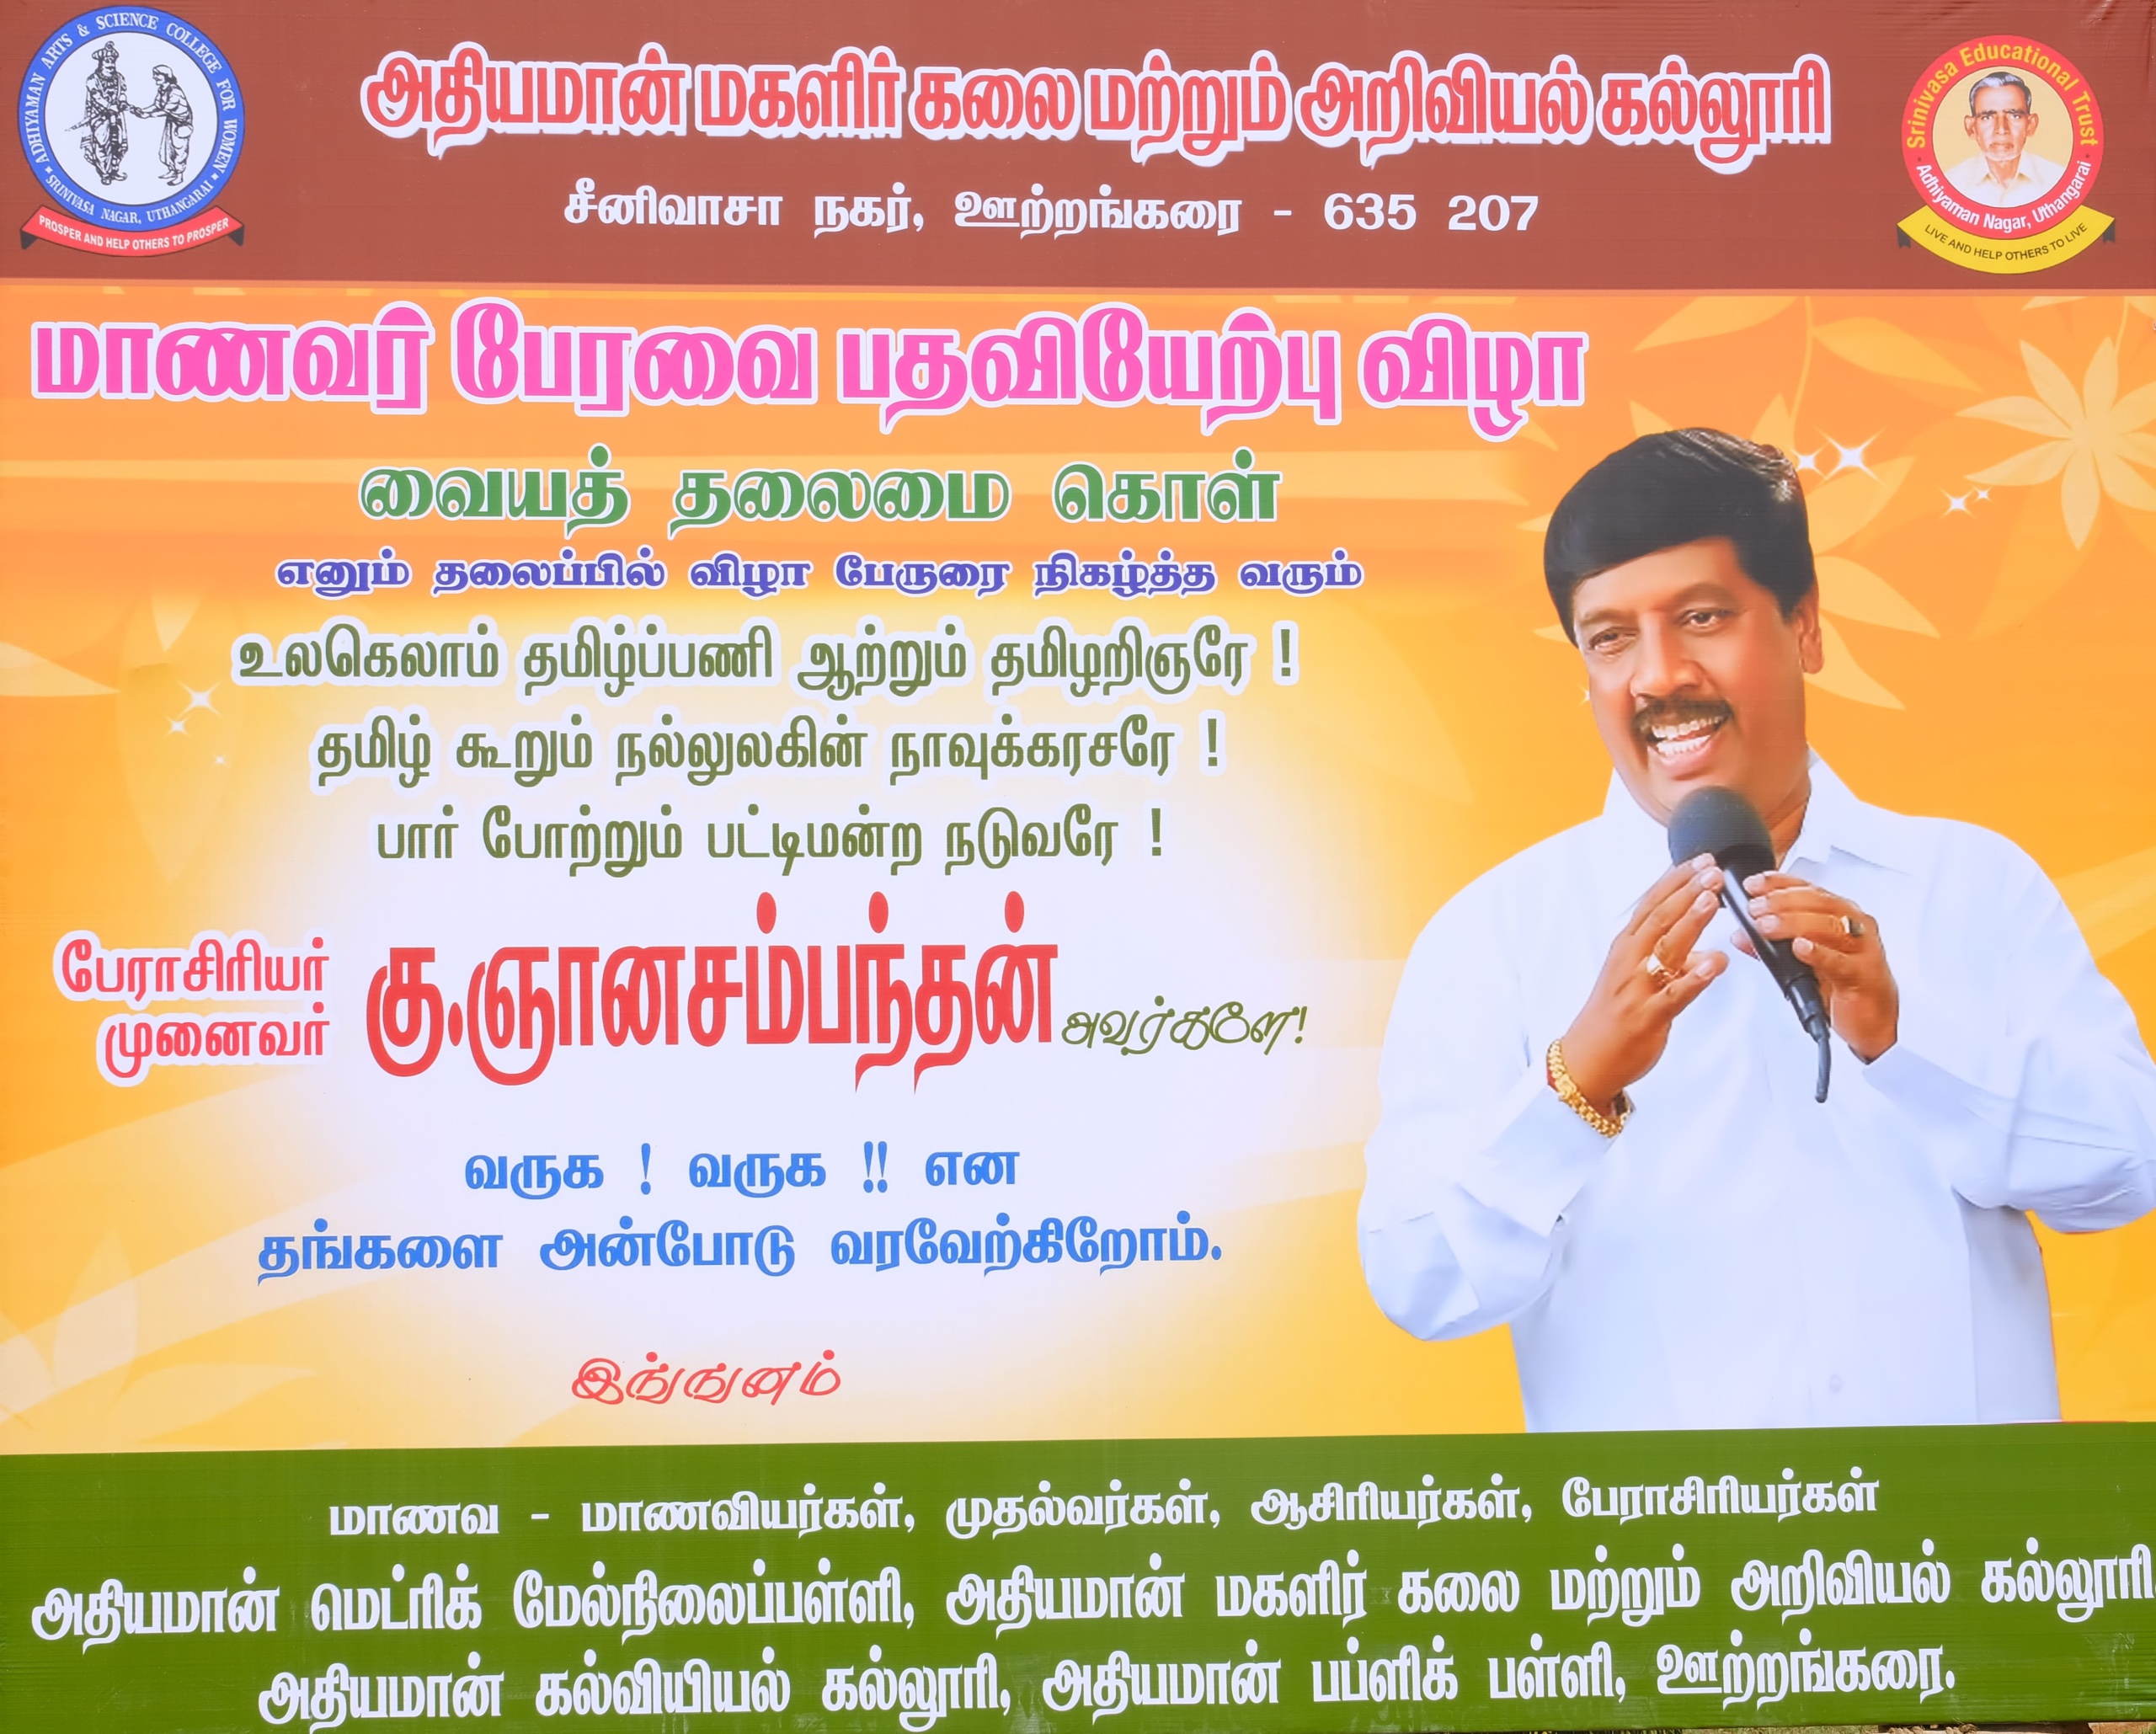 STUDENT COUNCIL INAUGURATION – Adhiyaman Arts & Science College for Women